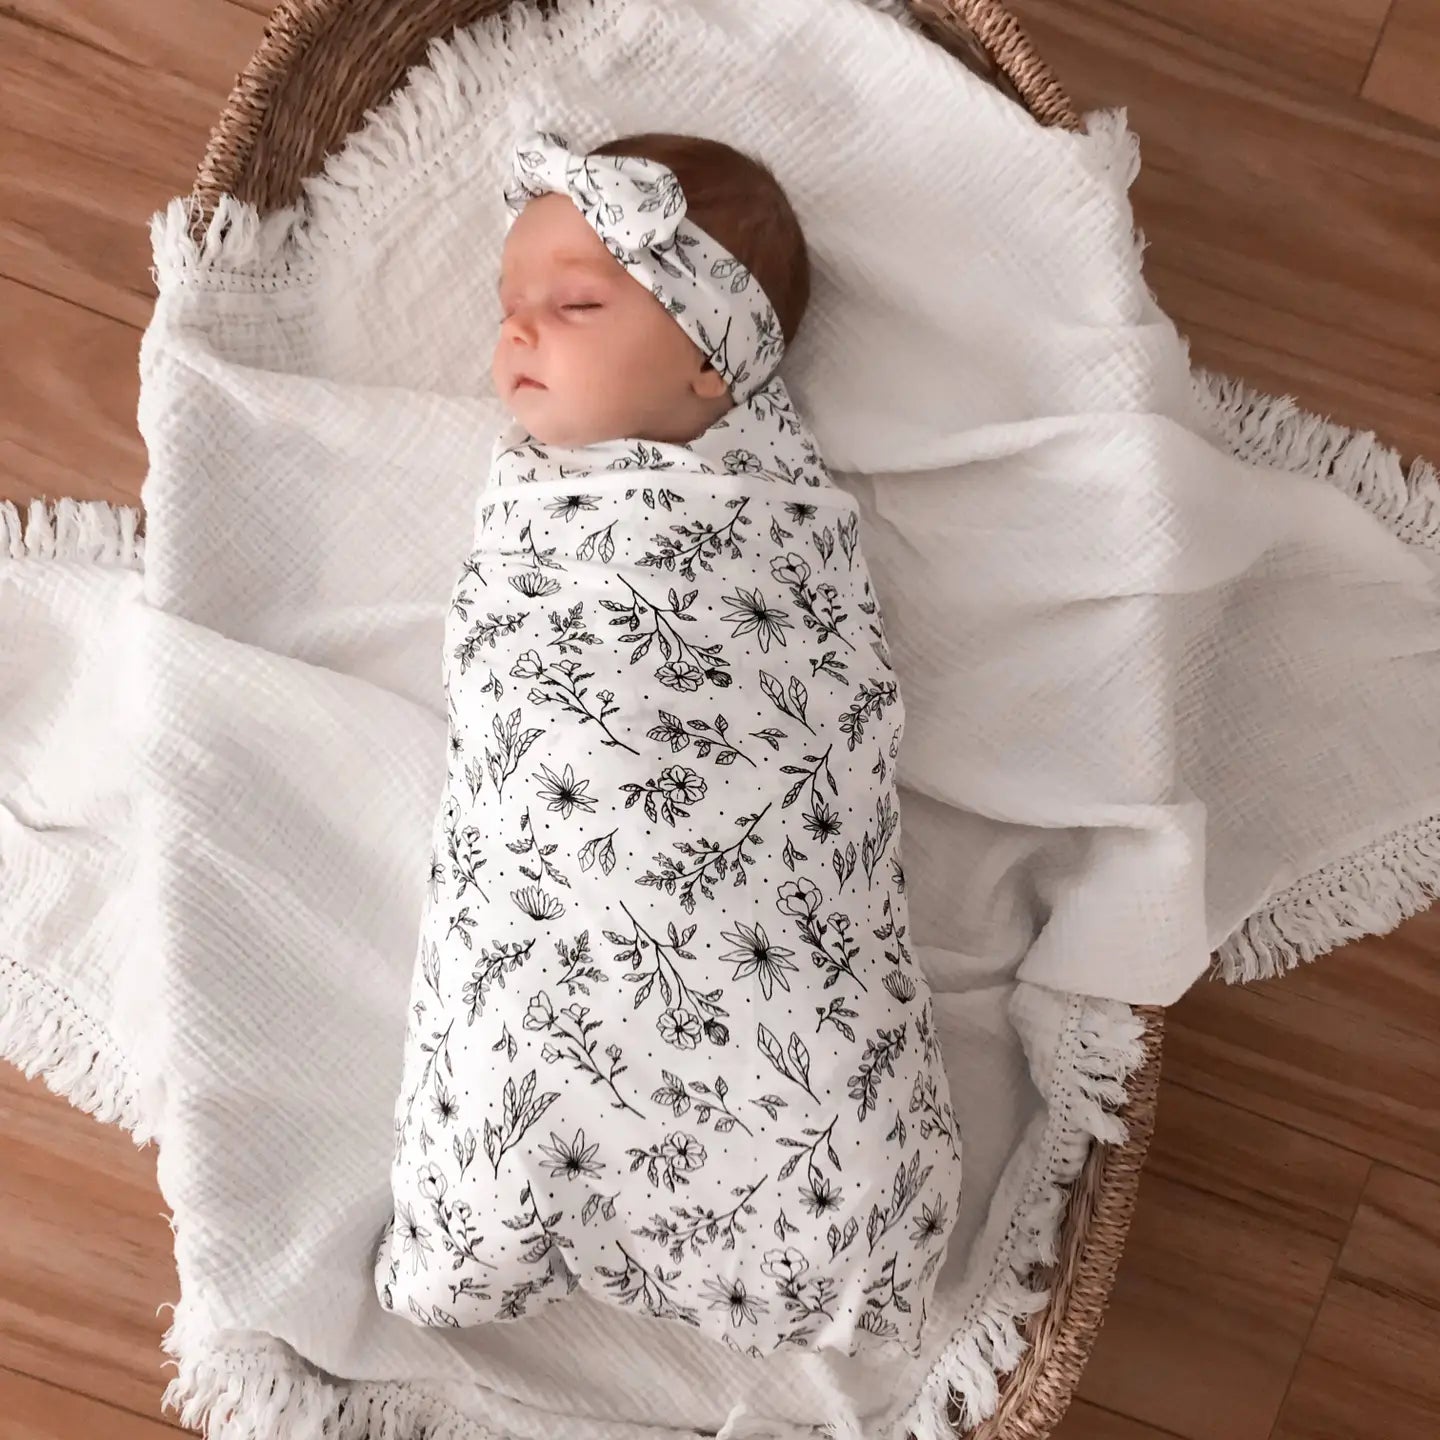 Calla Polka Dot Floral Swaddle Set (Beanie, Head Wrap and Swaddle)